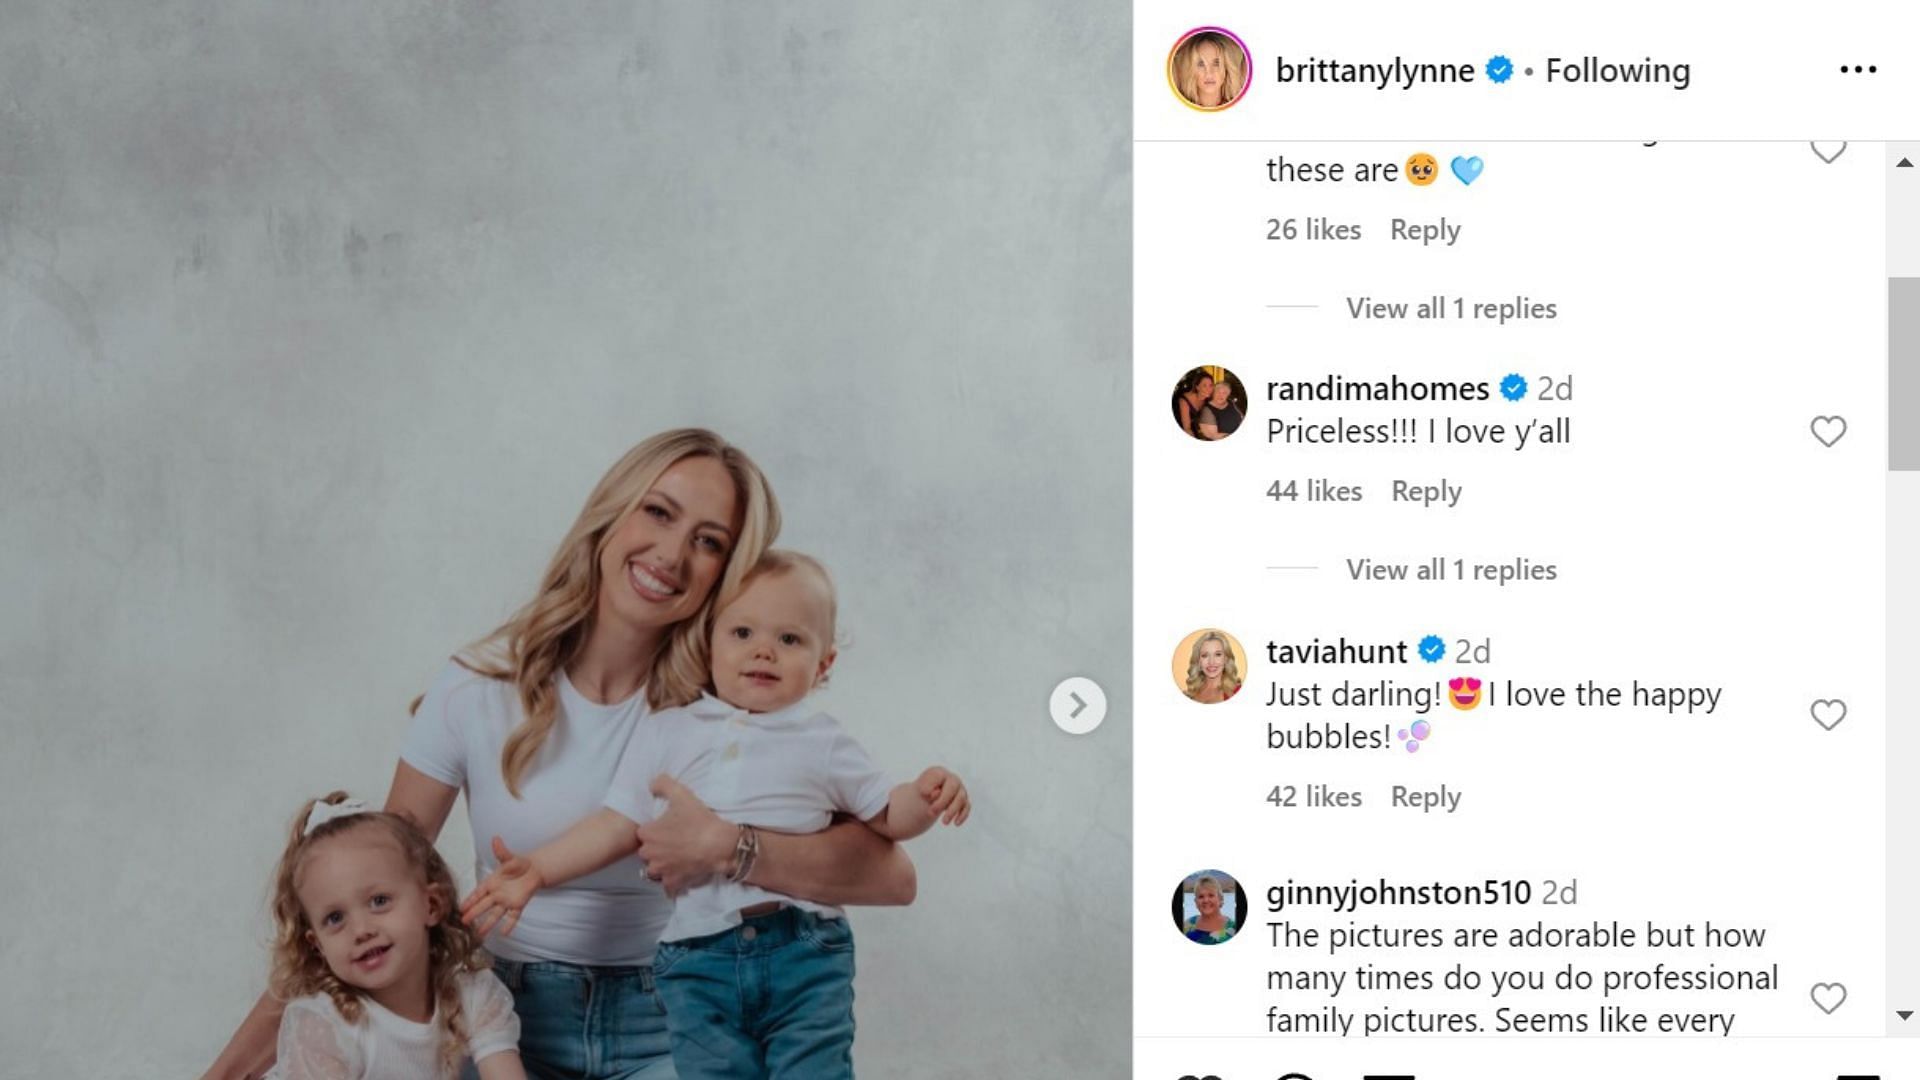 Tavia Hunt gushed over photos of Patrick and Brittany Mahomes&#039; family.